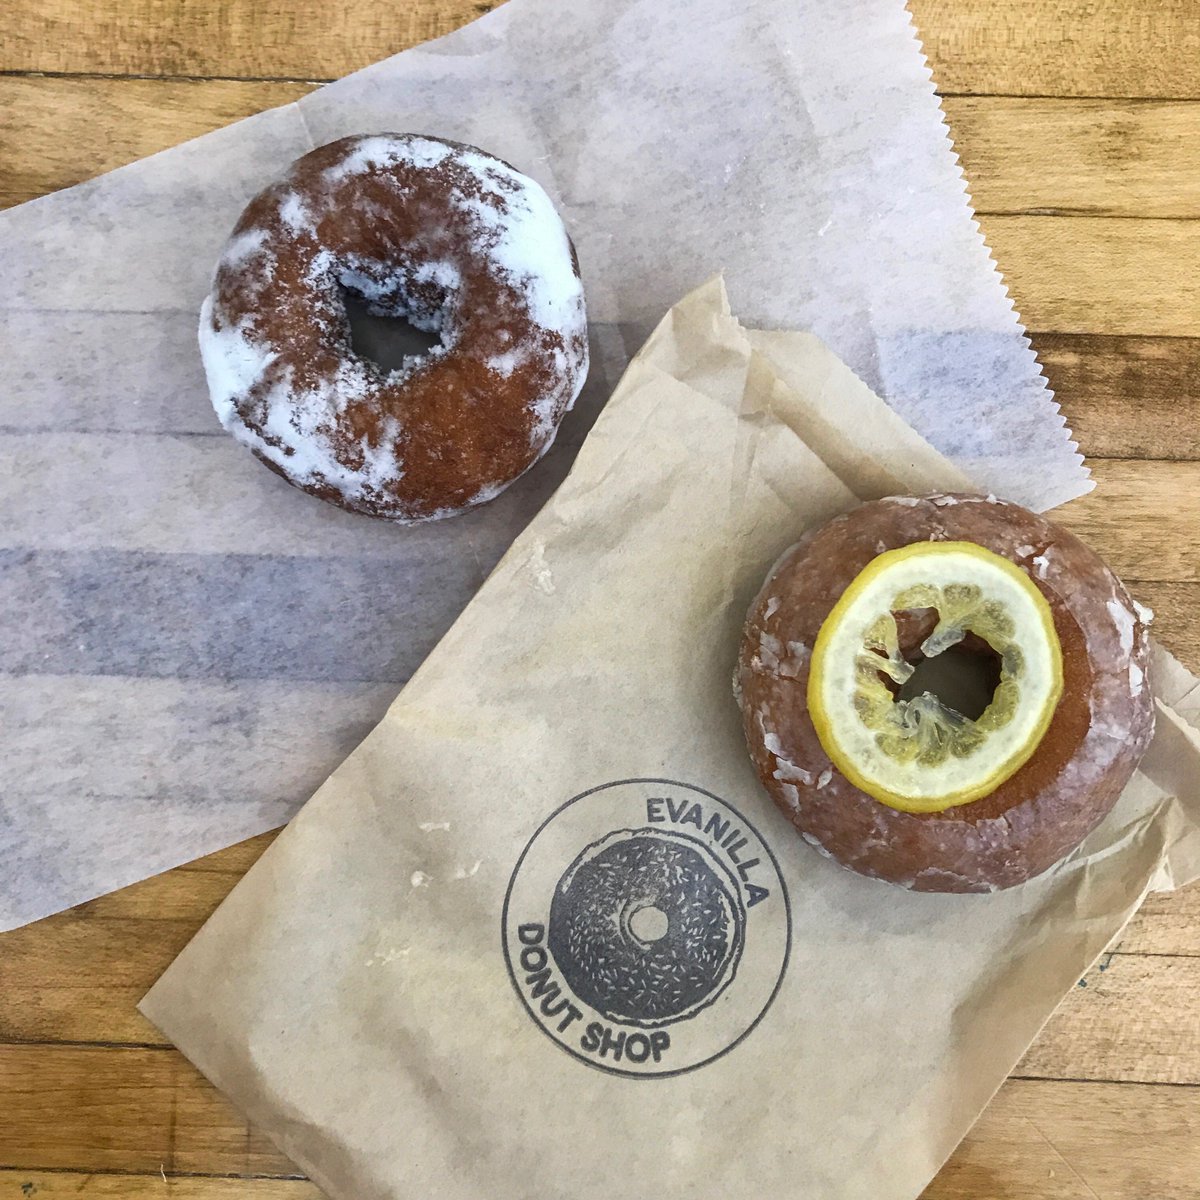 We'll use #NationalDonutDay as an excuse to get two donuts from @eva.nilla today! 🍩 What's your favorite Evanilla flavor? We know it's hard to choose, but we're going with a refreshing Lemon 🍋 and classic Powdered Sugar for our morning treat! #broadstreetmarket #donuts